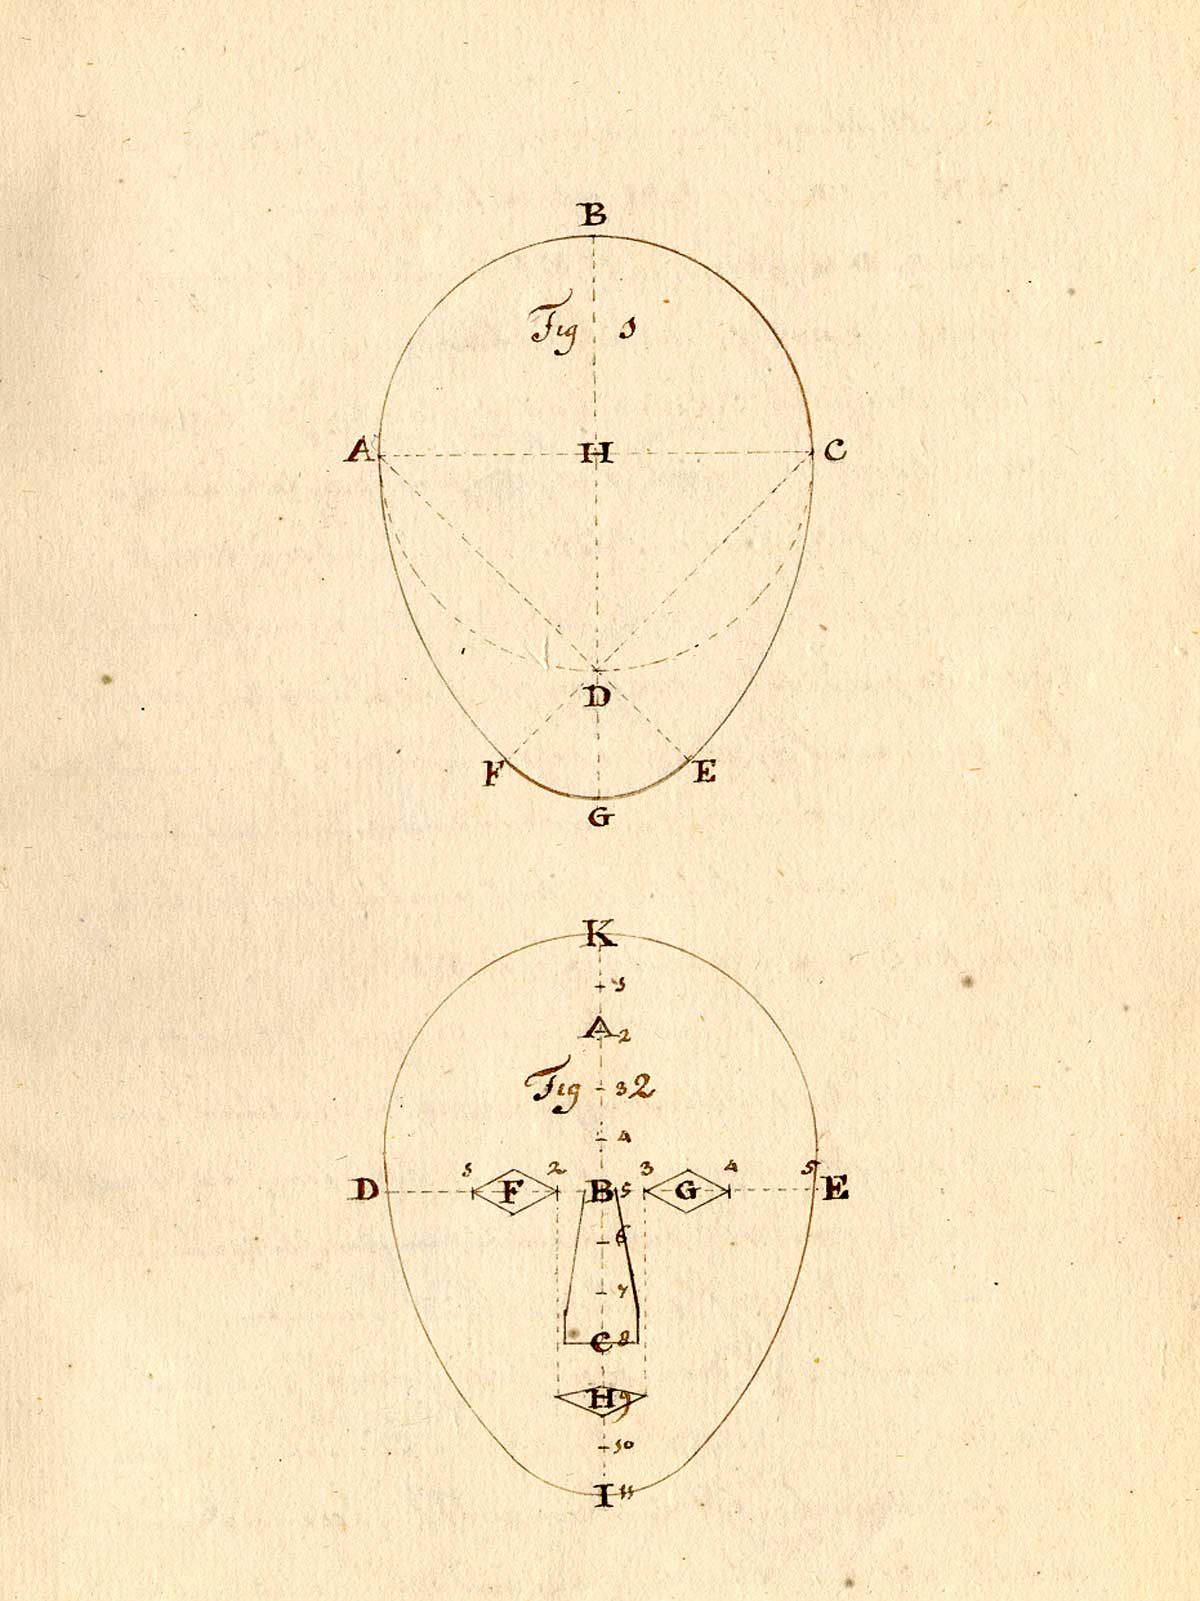 Manuscript drawing of two ovals representing the shape and proportions of the face; the upper oval is blank with lines and index letters indicating measurements; the lower oval includes measurements for positioning of the eyes, nose, and mouth; from Anonymous treatise on physiognomy, NLM call no.: MS B 662.